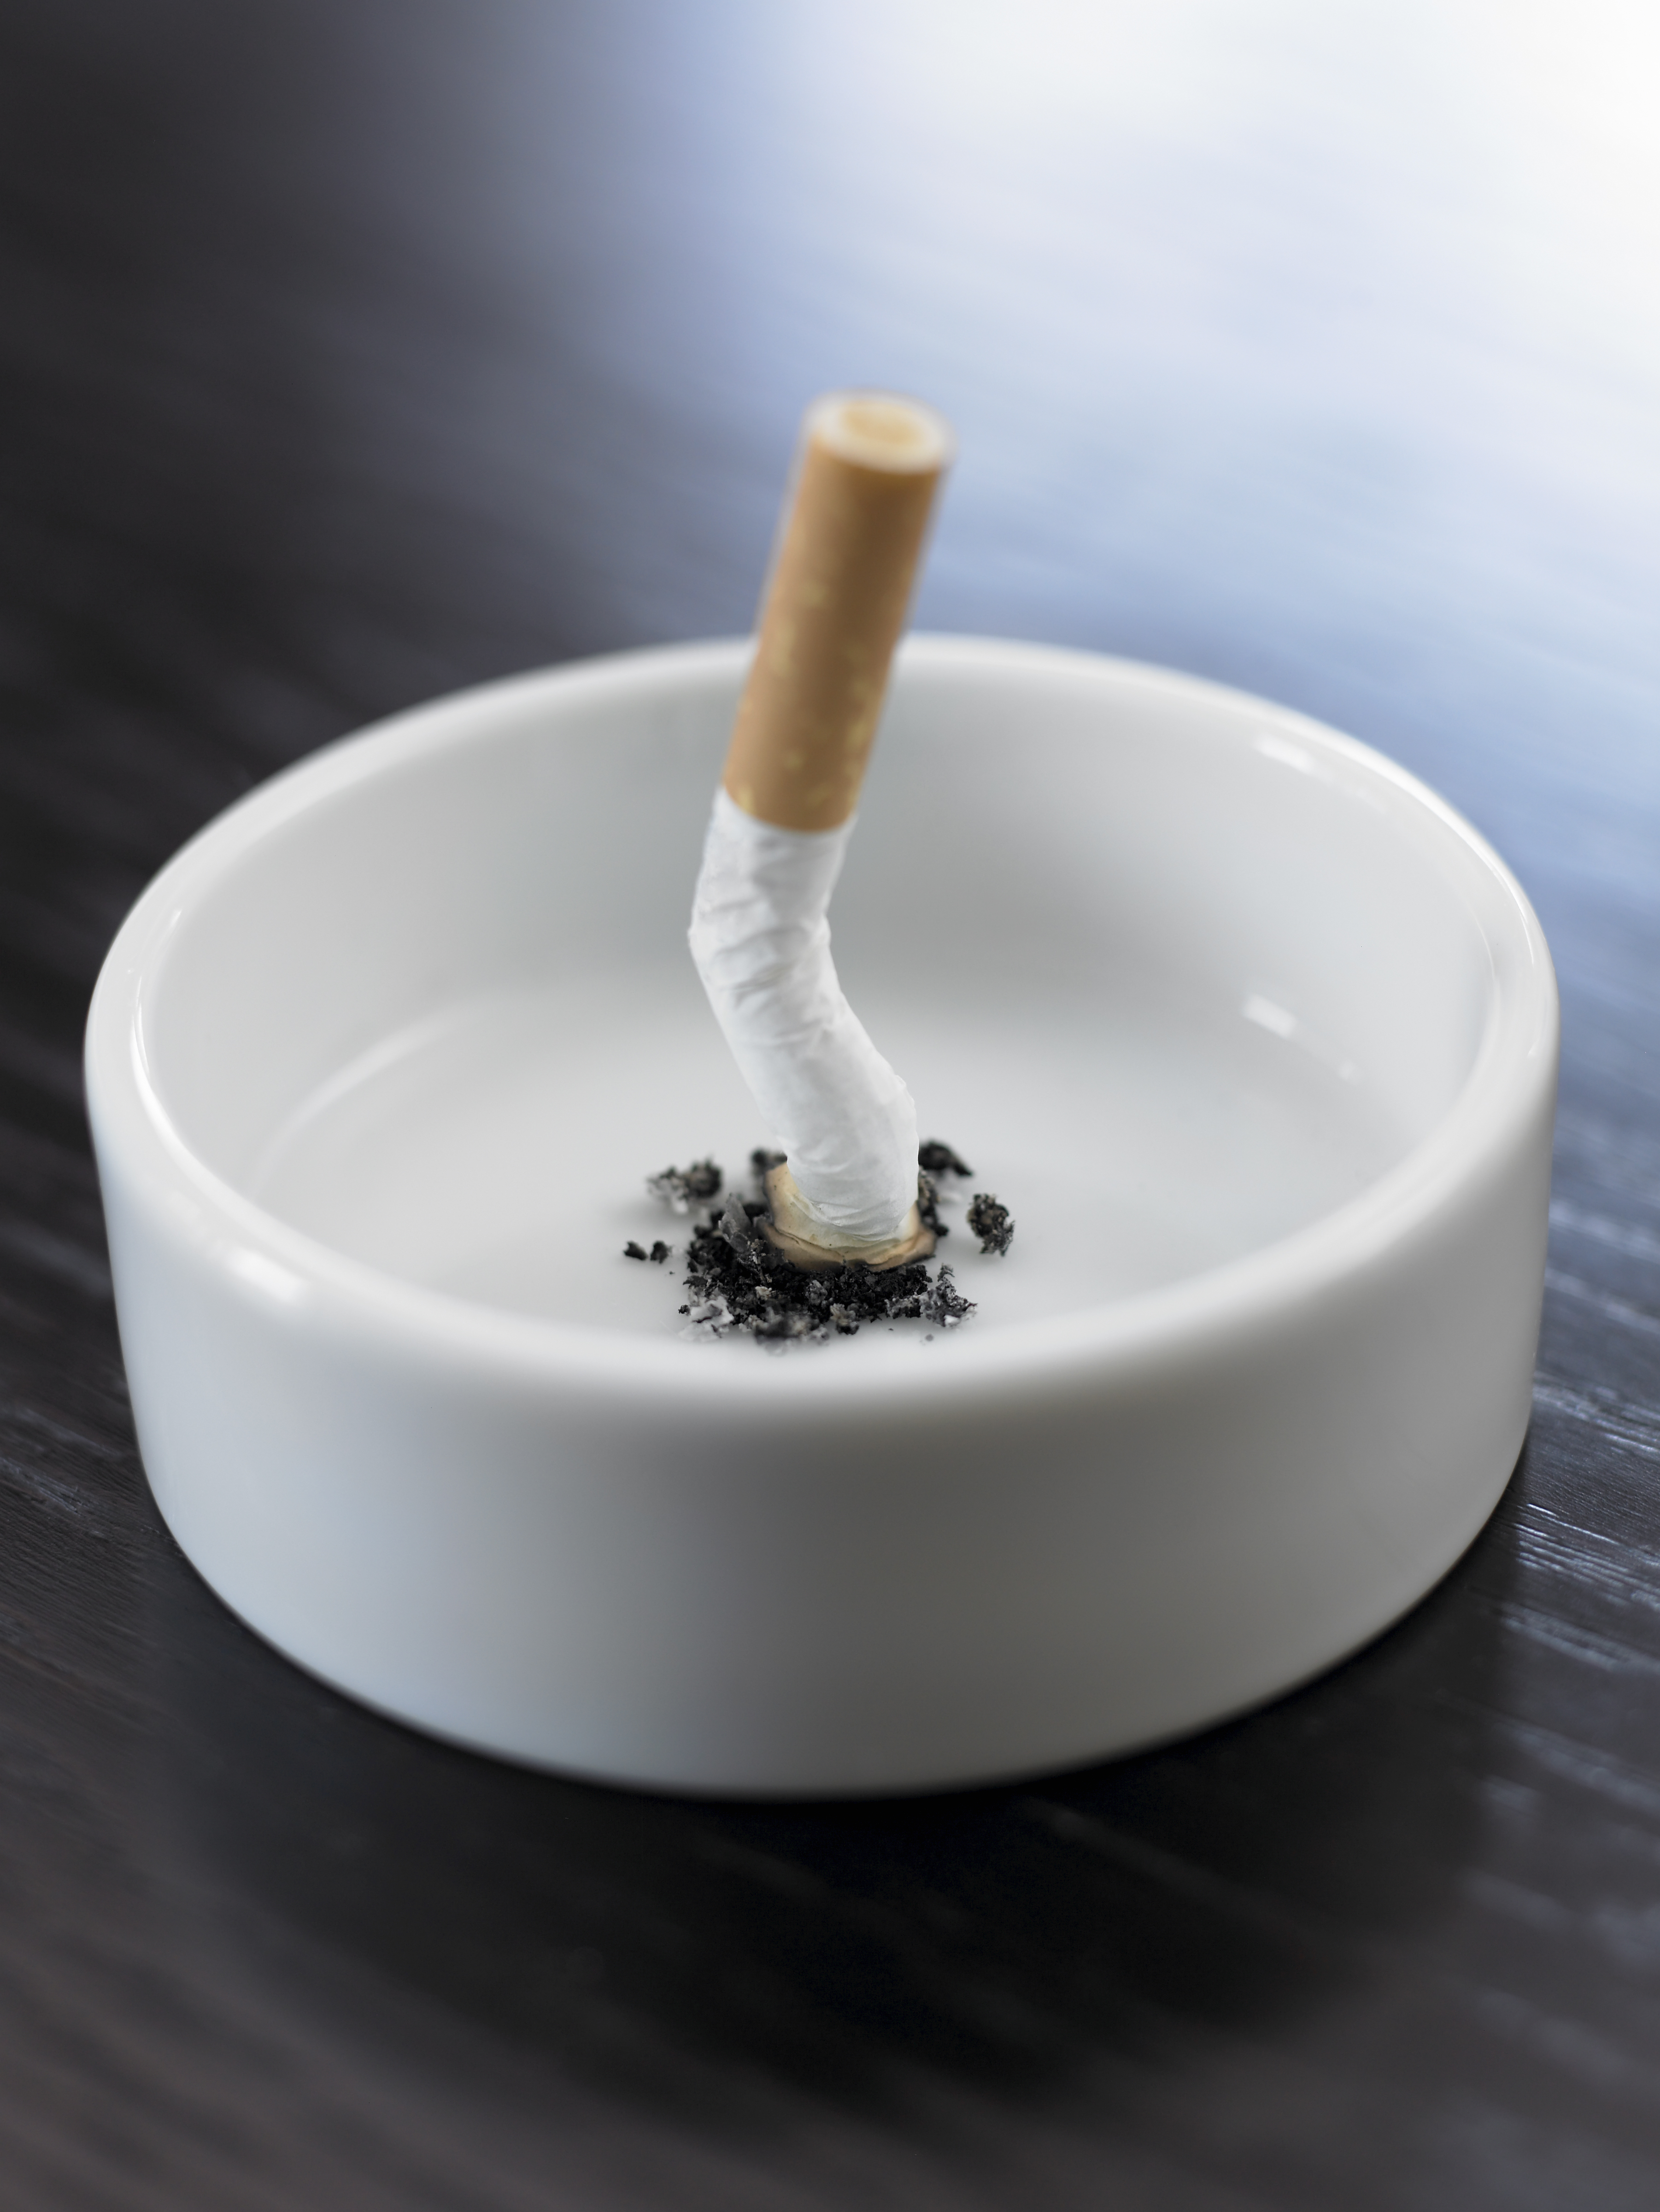 A single cigarette butt extinguished in an ashtray